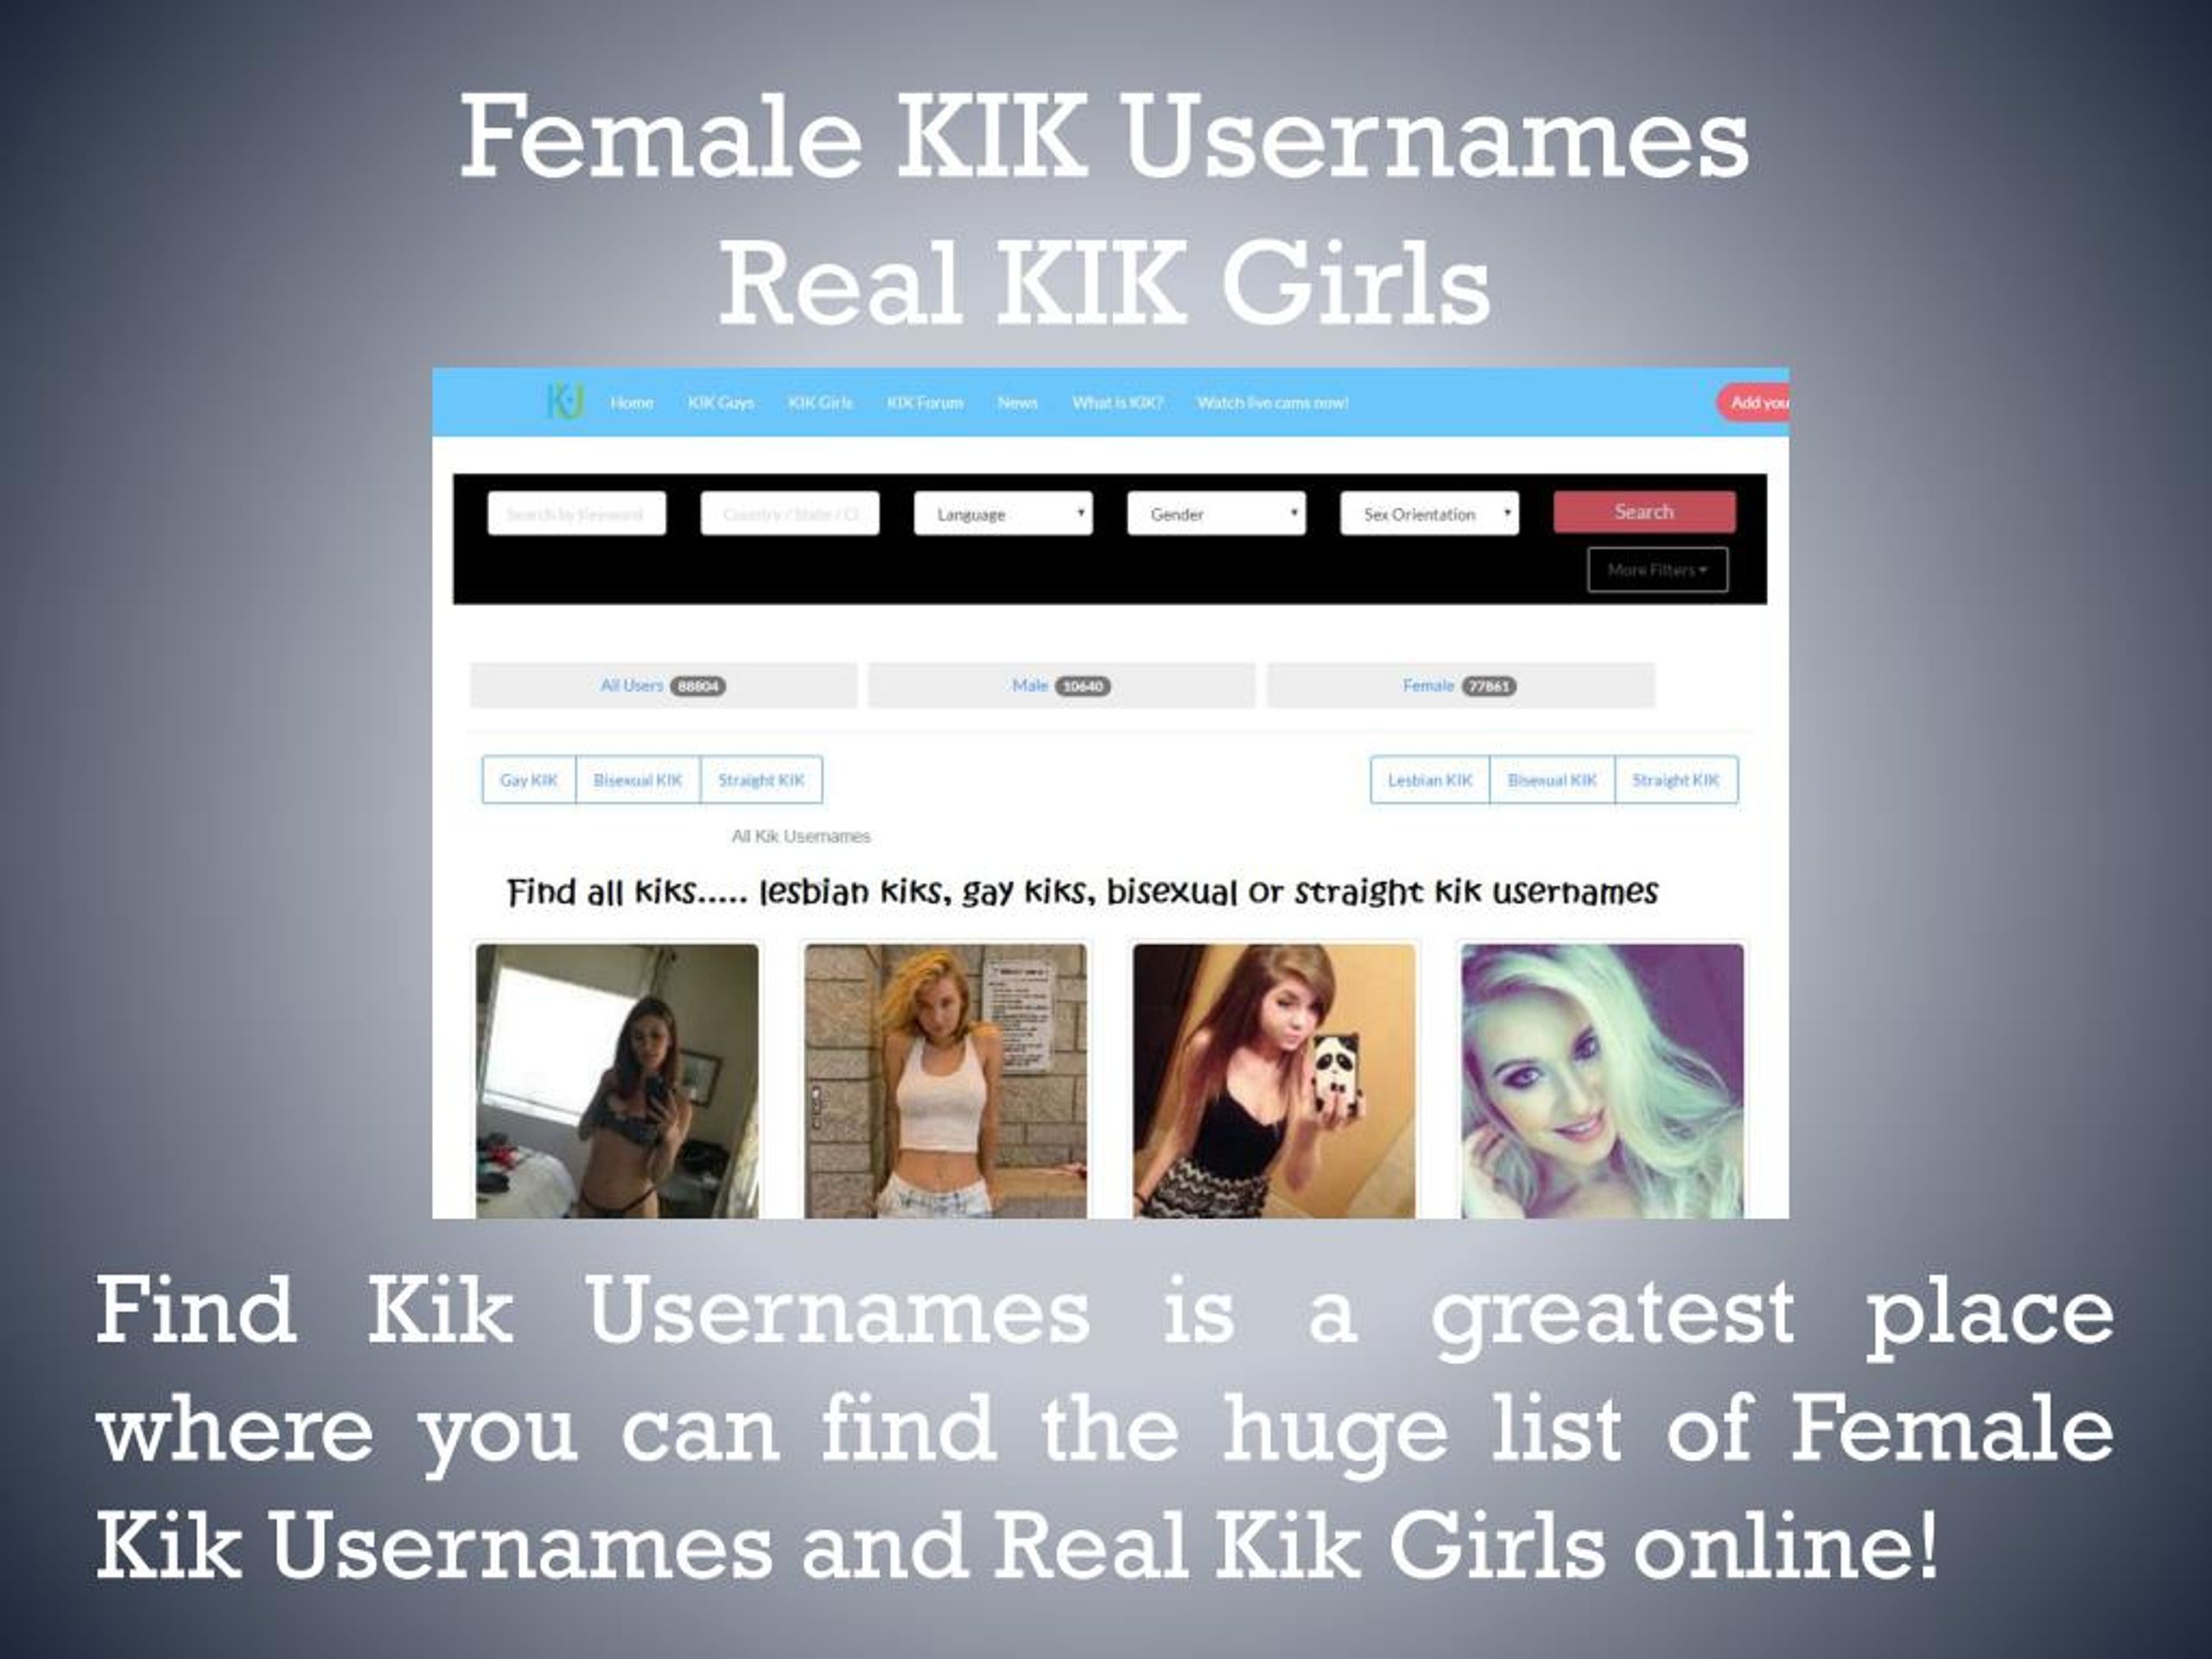 Find Kik Usernames is a greatest place where you can find the huge list of ...